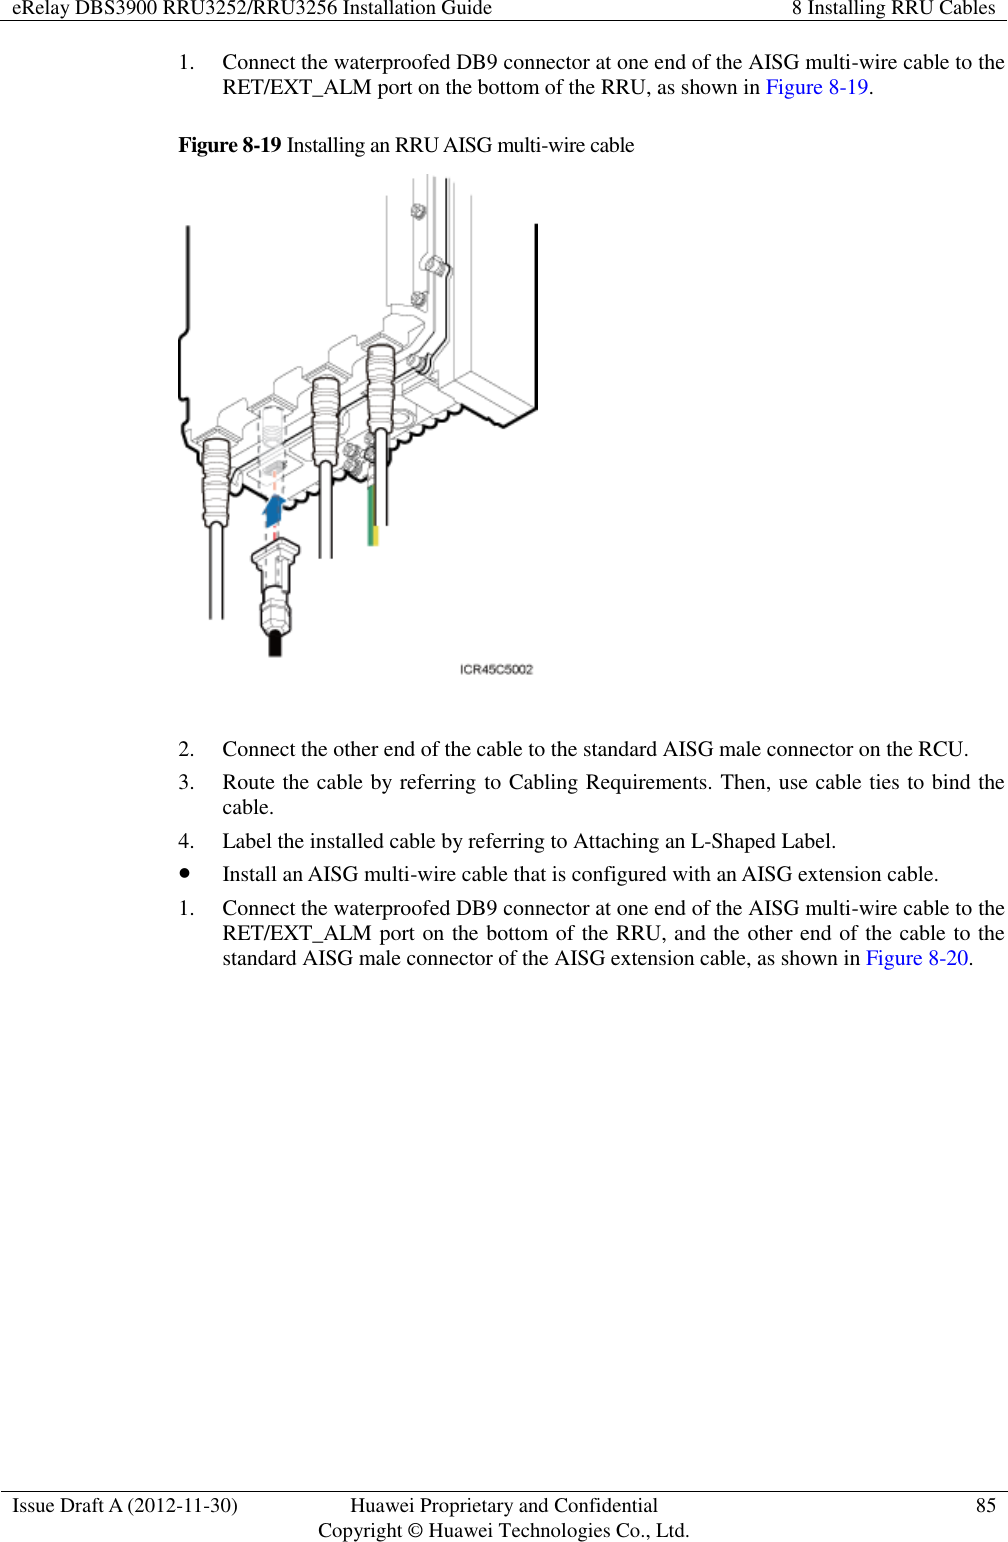 eRelay DBS3900 RRU3252/RRU3256 Installation Guide 8 Installing RRU Cables  Issue Draft A (2012-11-30) Huawei Proprietary and Confidential                                     Copyright © Huawei Technologies Co., Ltd. 85  1. Connect the waterproofed DB9 connector at one end of the AISG multi-wire cable to the RET/EXT_ALM port on the bottom of the RRU, as shown in Figure 8-19. Figure 8-19 Installing an RRU AISG multi-wire cable   2. Connect the other end of the cable to the standard AISG male connector on the RCU. 3. Route the cable by referring to Cabling Requirements. Then, use cable ties to bind the cable. 4. Label the installed cable by referring to Attaching an L-Shaped Label.  Install an AISG multi-wire cable that is configured with an AISG extension cable.   1. Connect the waterproofed DB9 connector at one end of the AISG multi-wire cable to the RET/EXT_ALM port on the bottom of the RRU, and the other end of the cable to the standard AISG male connector of the AISG extension cable, as shown in Figure 8-20. 